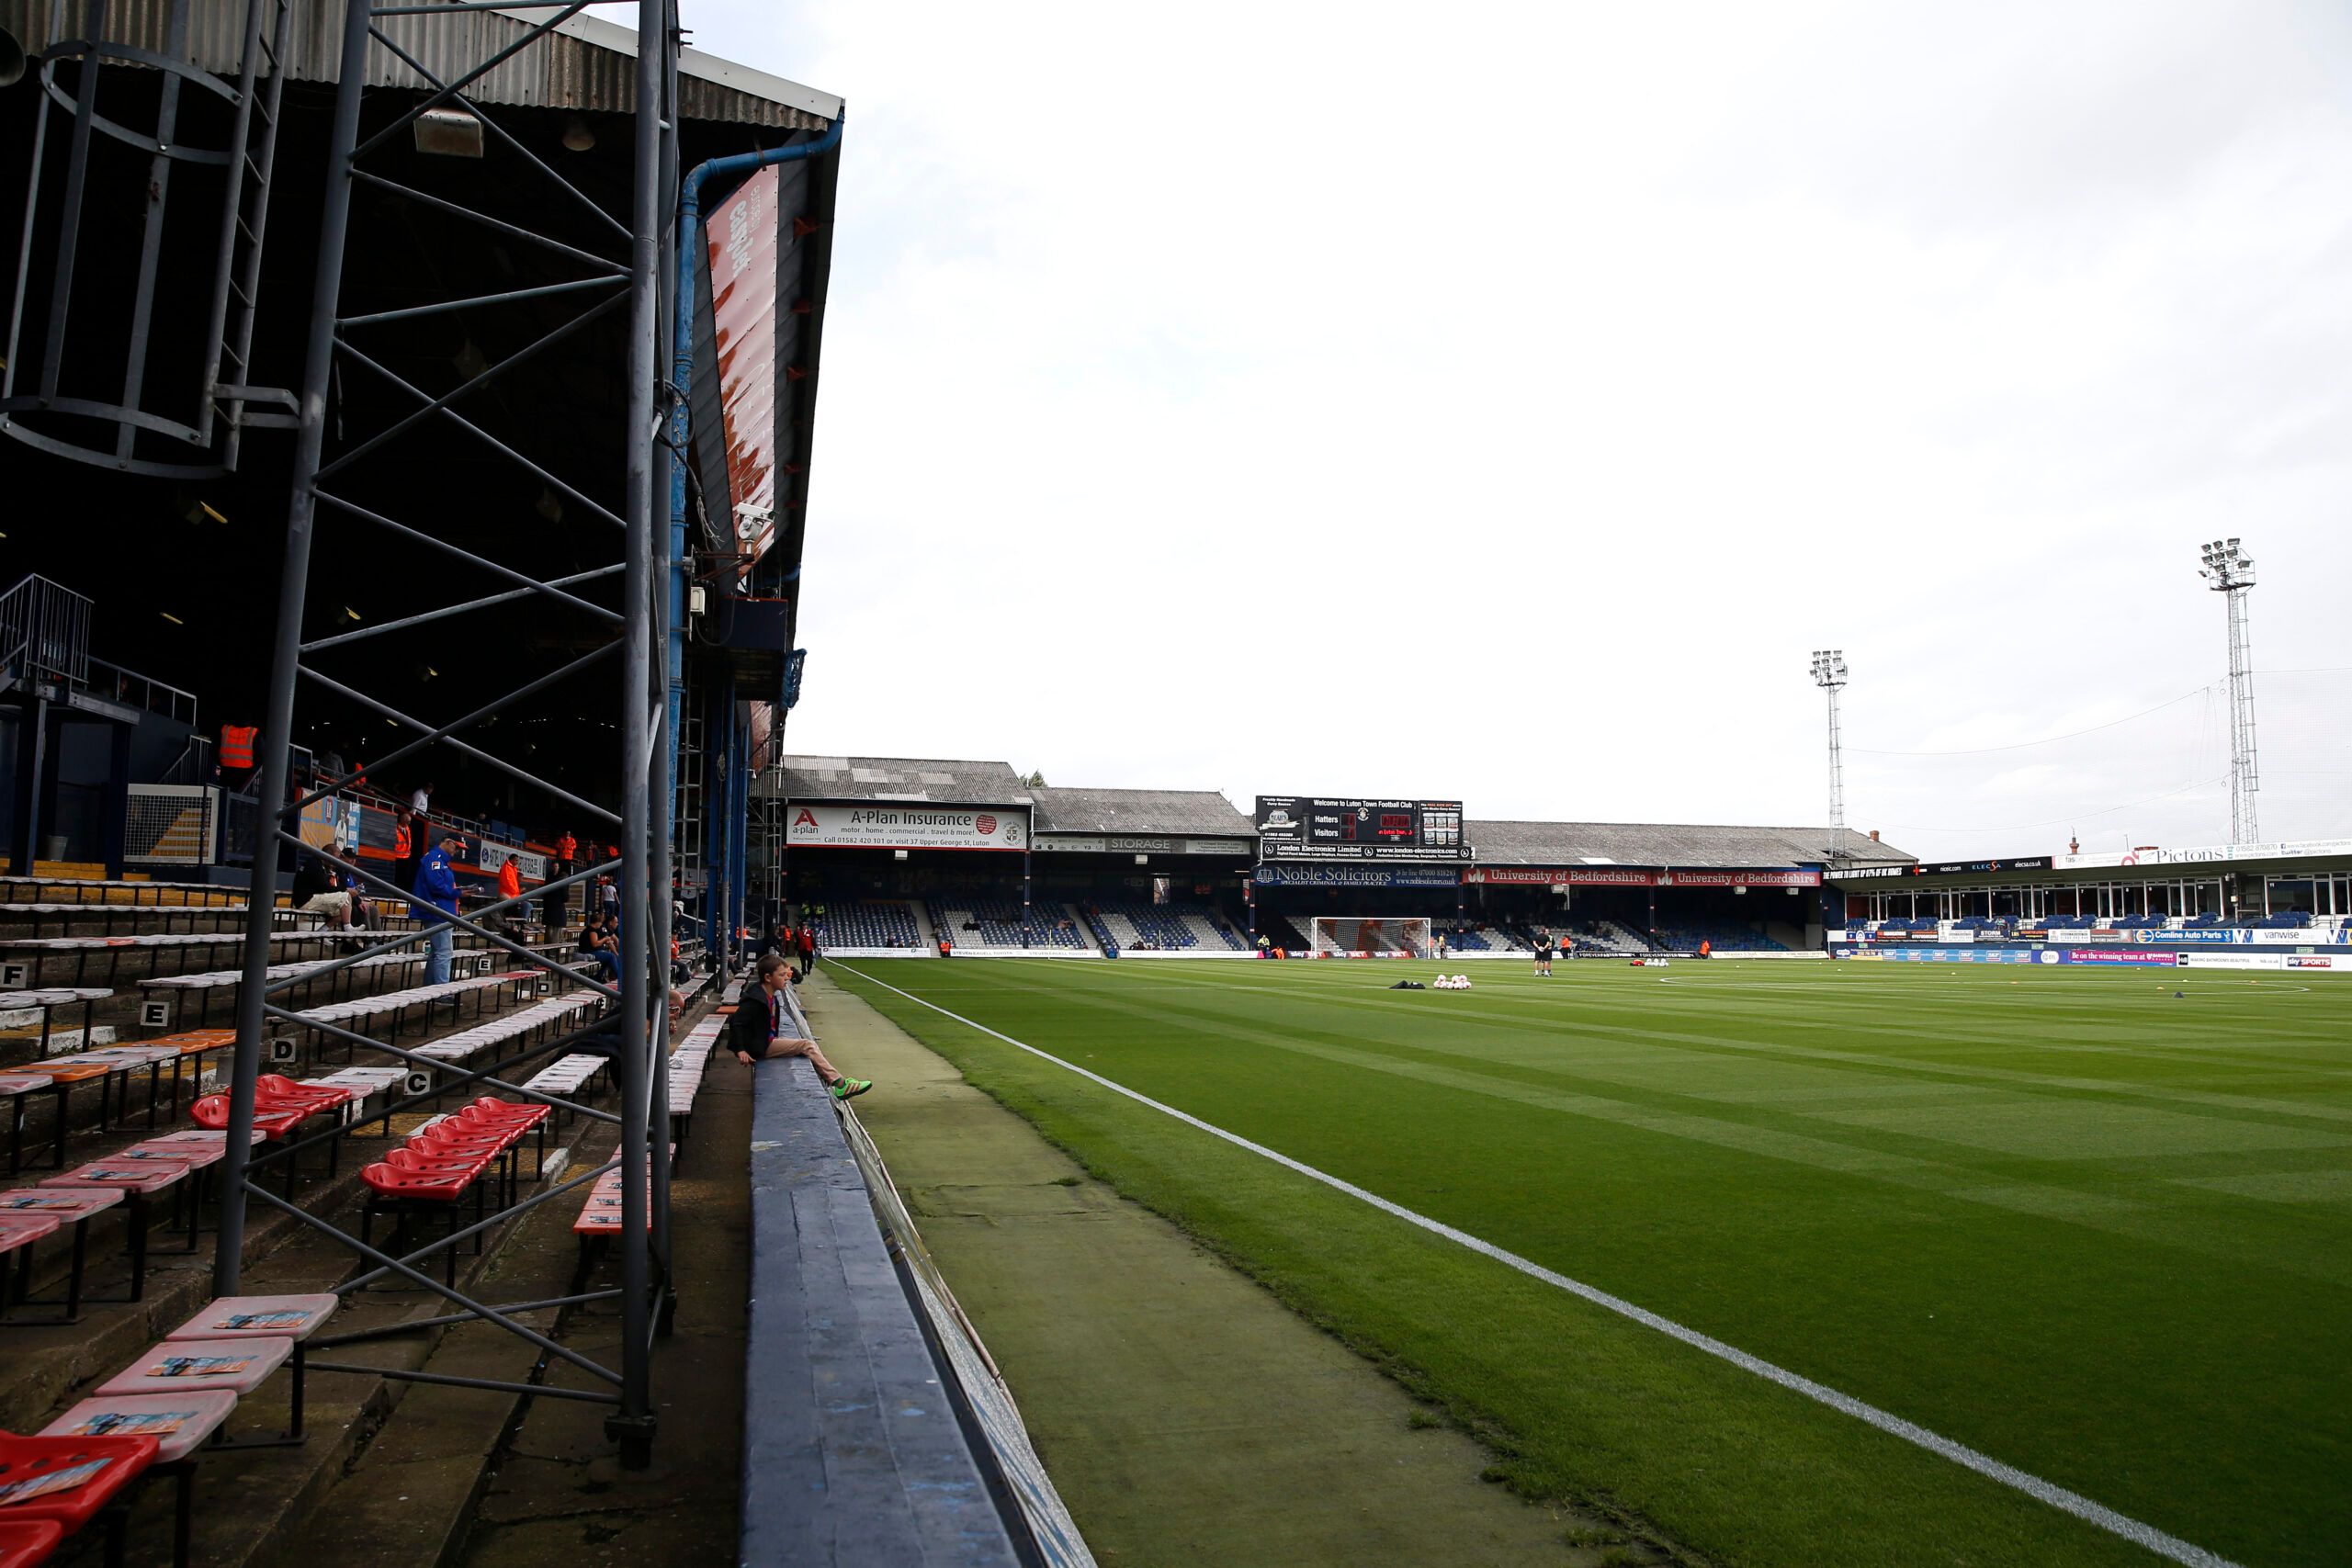 Britain Football Soccer - Luton Town v Wycombe Wanderers - Sky Bet League Two - Kenilworth Road - 16/17 - 3/9/16
General view outside the stadium 
Mandatory Credit: Action Images / Matthew Childs

EDITORIAL USE ONLY.